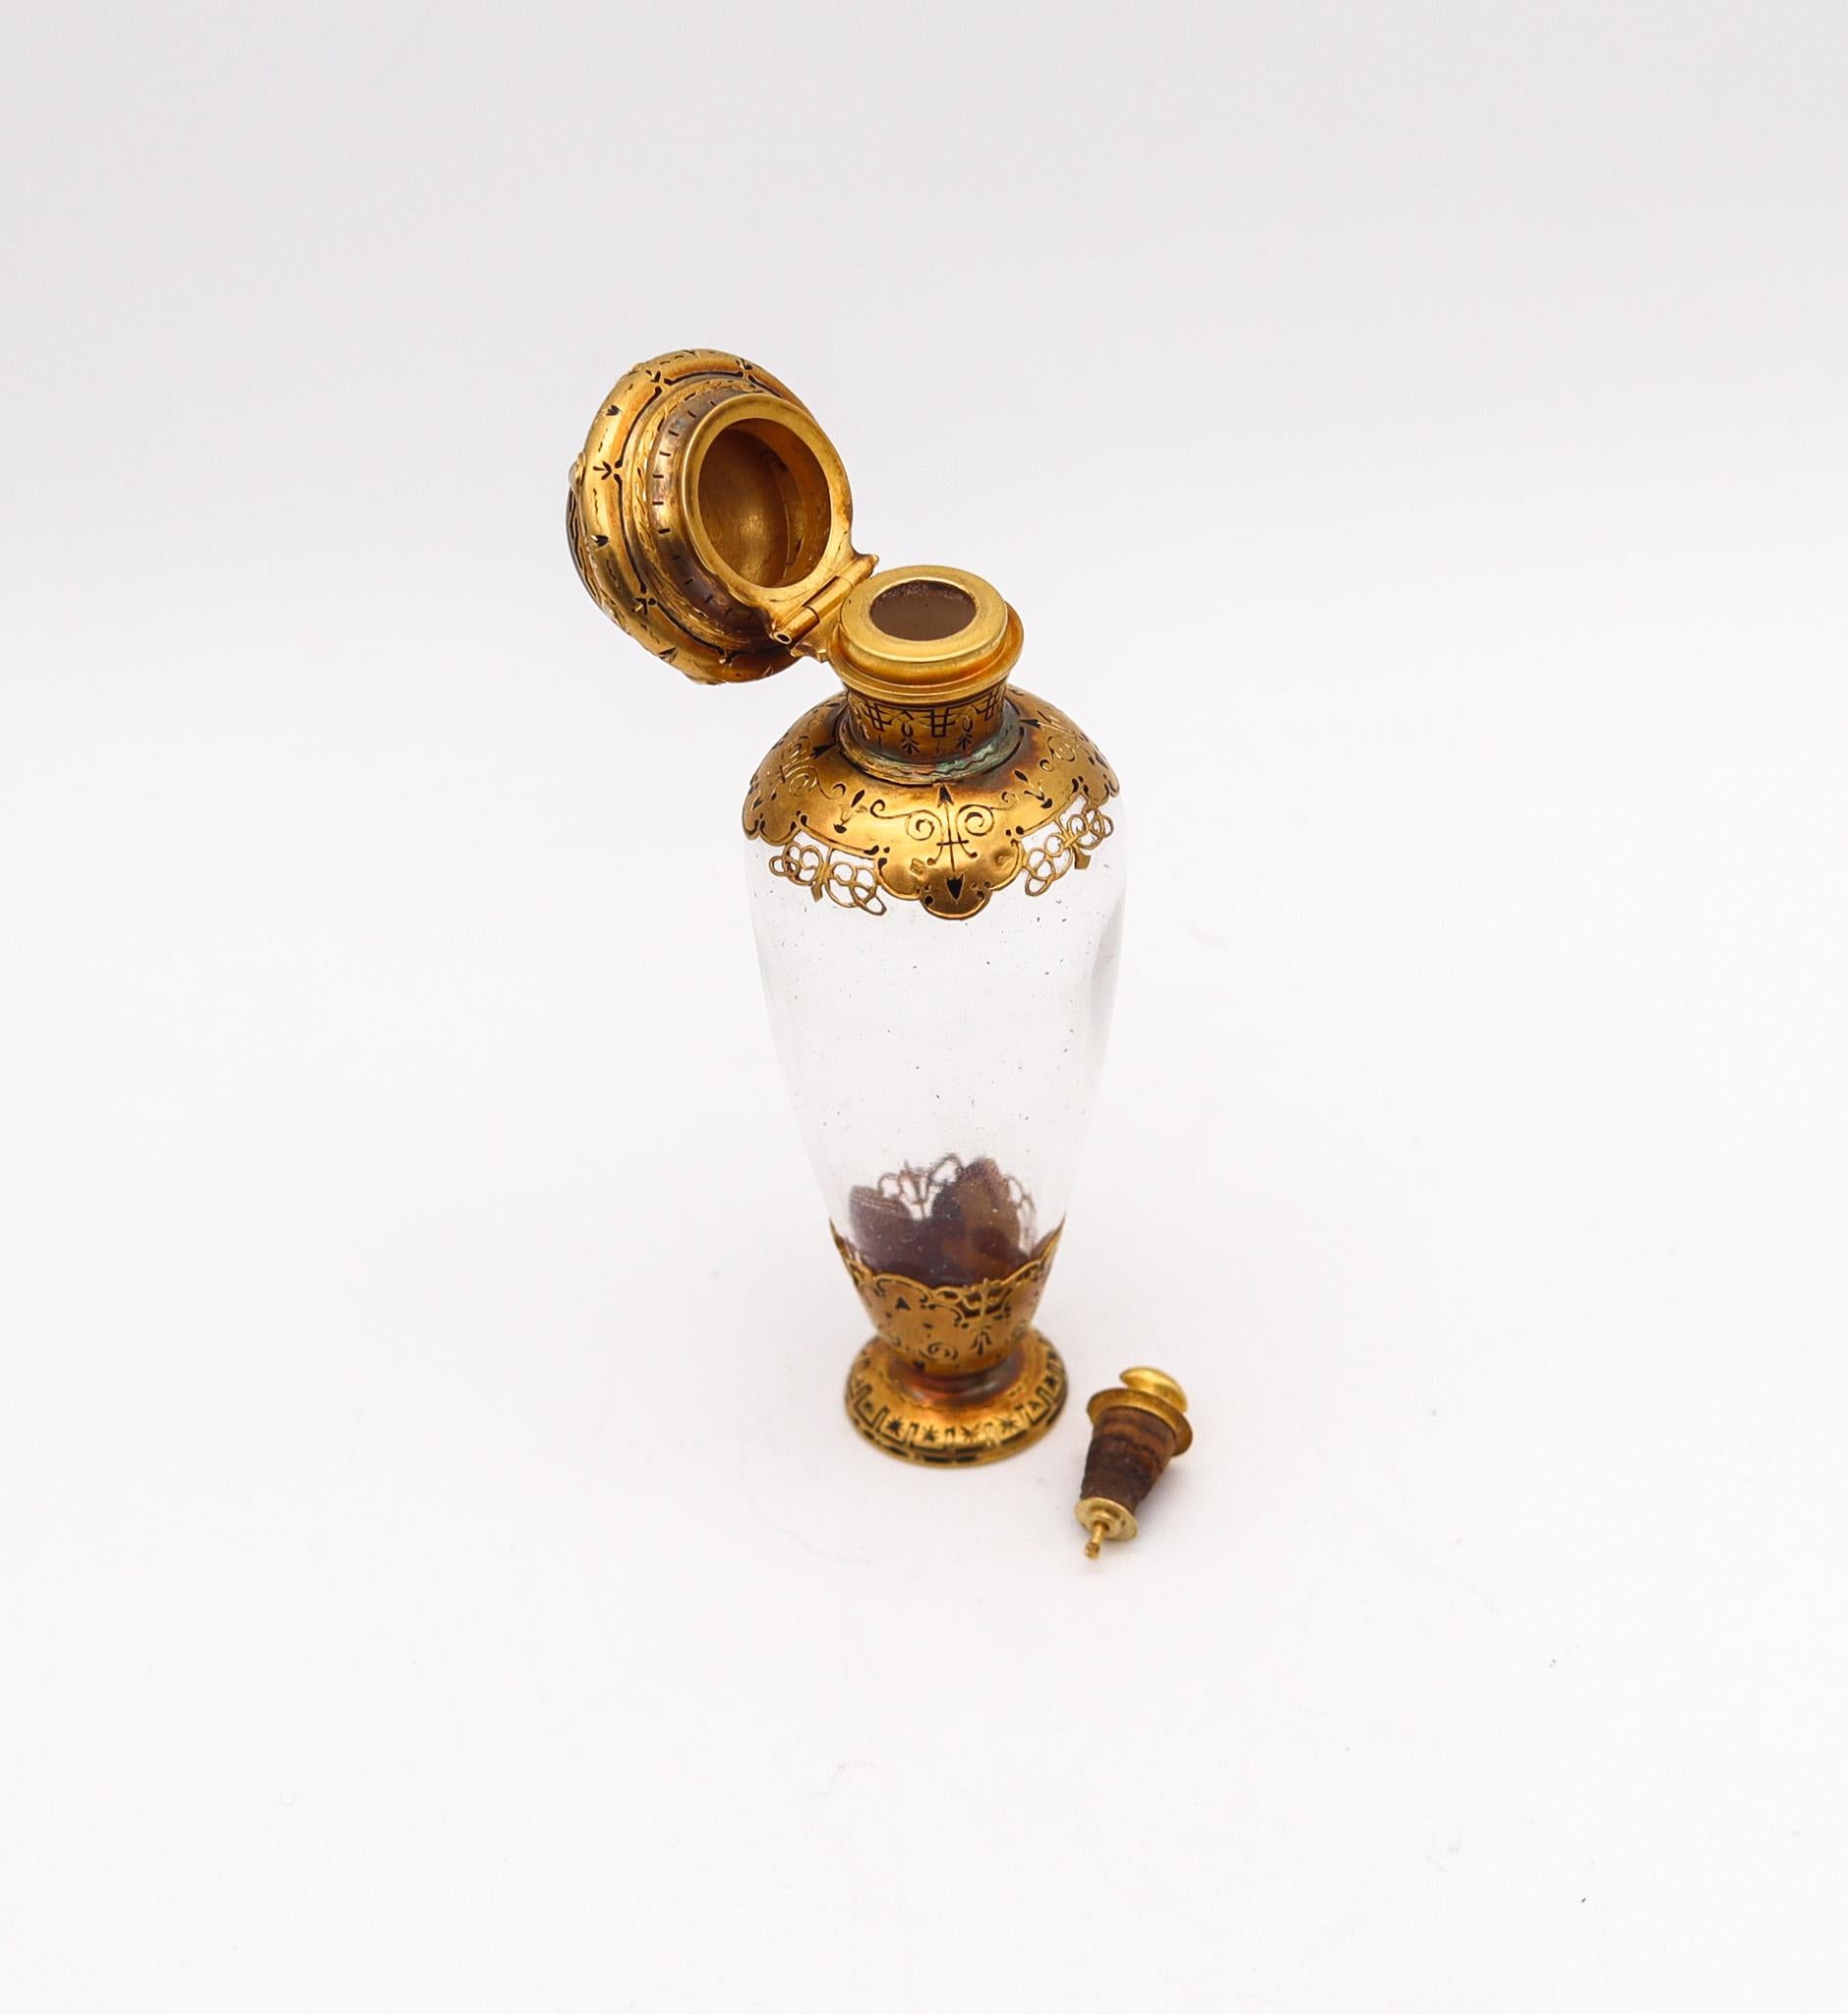 French 1870 Napoleon III Perfume Bottle Mount In 18Kt Yellow Gold With Gemstones For Sale 1